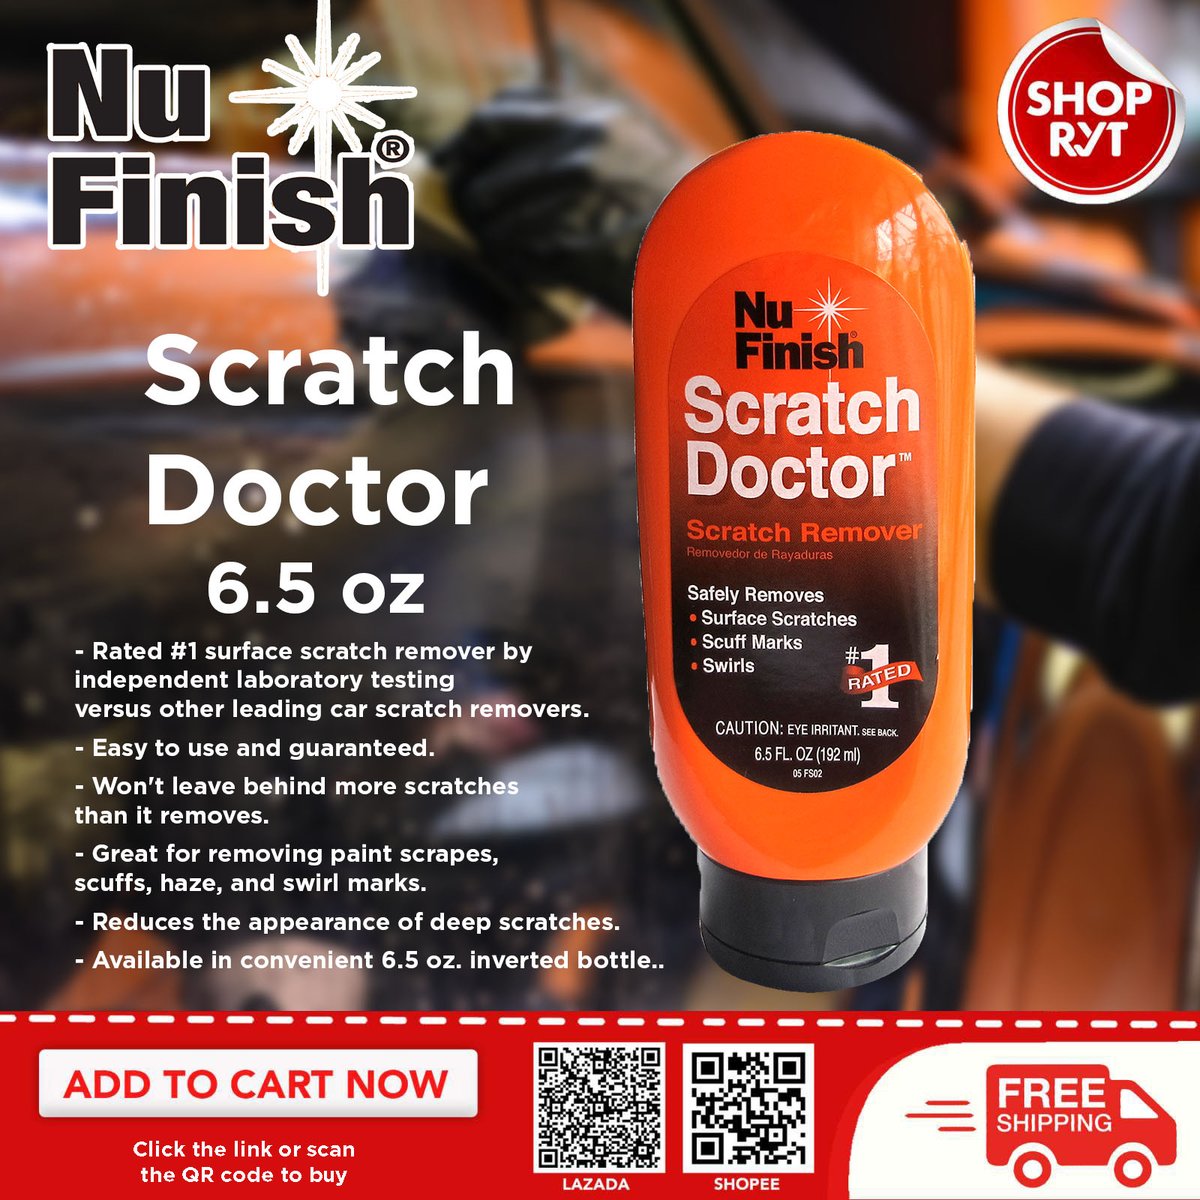 Nu Finish Scratch Doctor safely removes surface scratches scuff